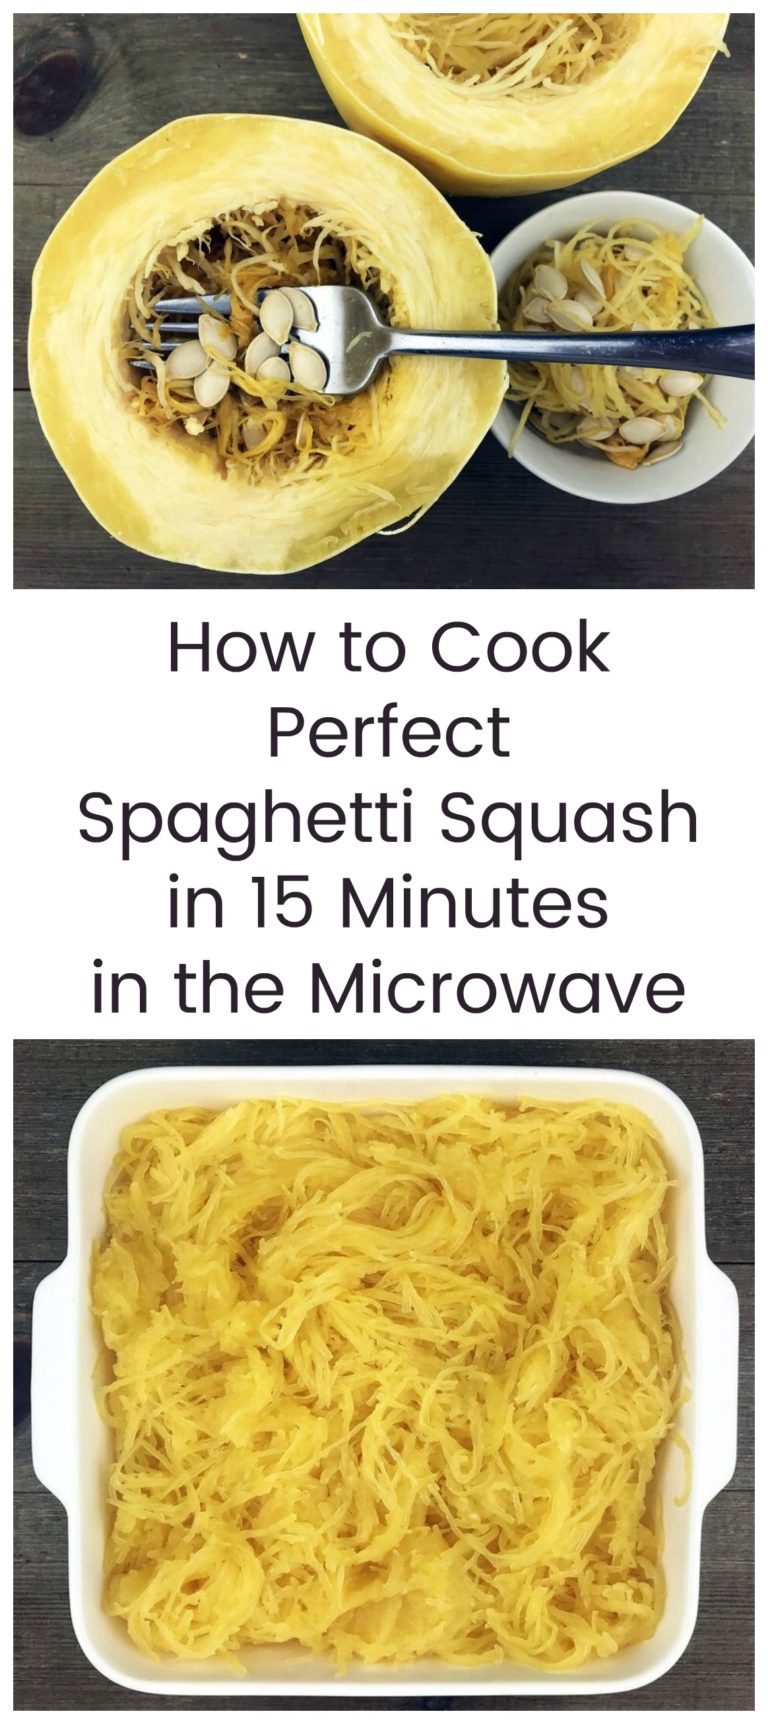 How To Cook Perfect Spaghetti Squash In 15 Minutes In The Microwave Jenny At Dapperhouse 3323